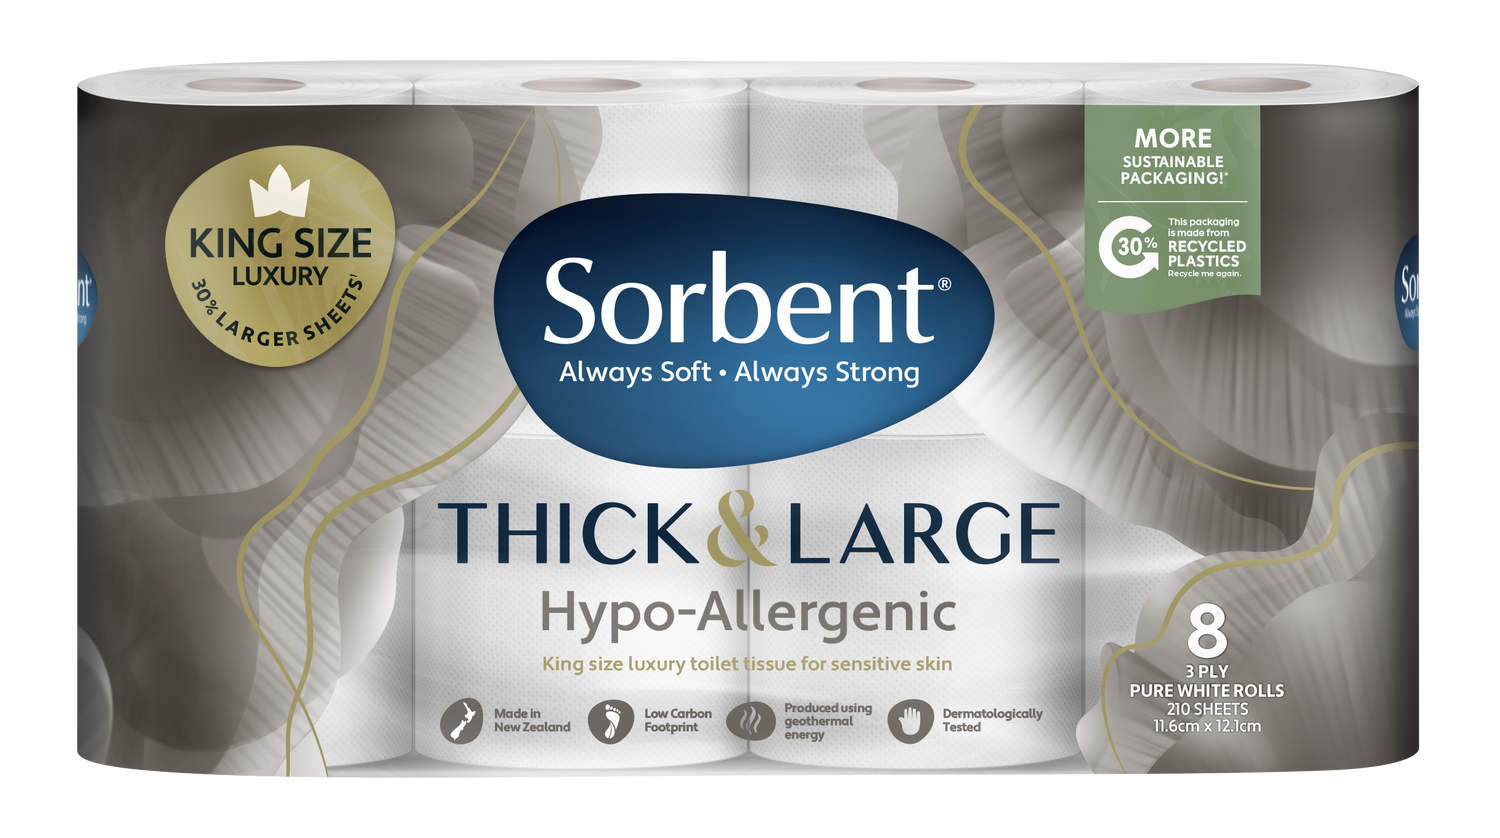 Thick & Large Hypo-Allergenic